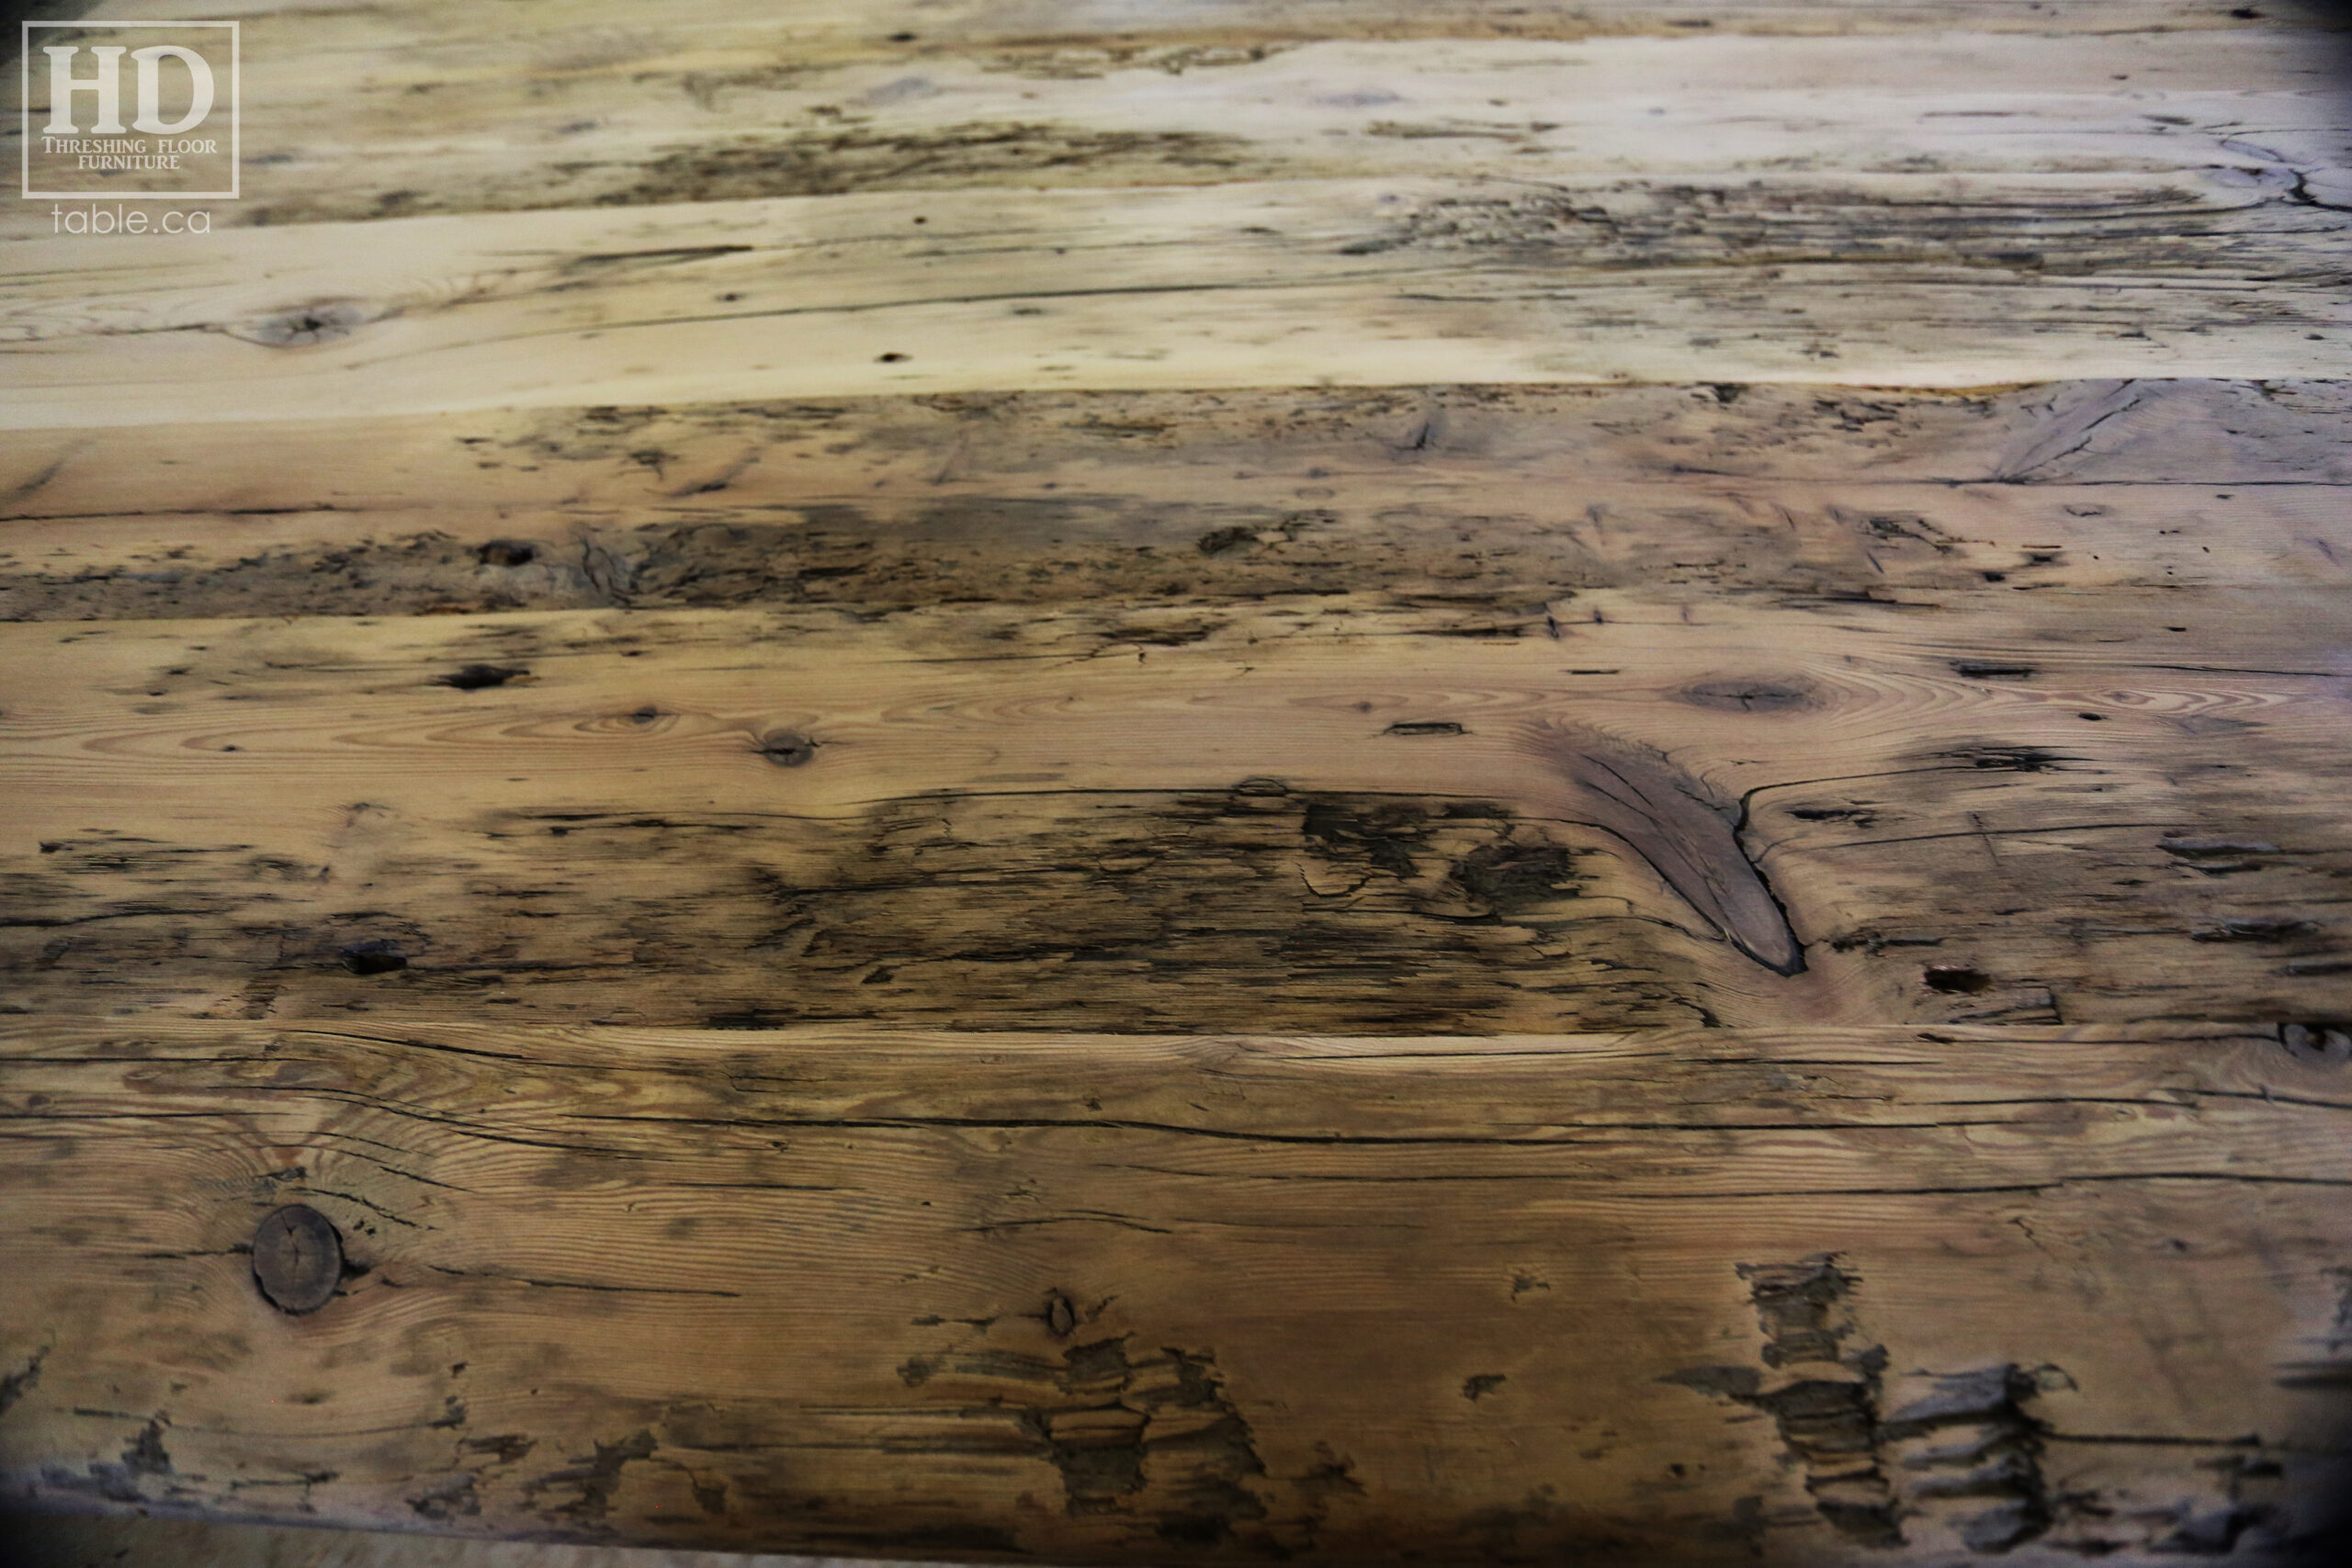 98" Ontario Barnwood Island Top & post we made for a Wiarton, Ontario Home - 52" wide - 34" height - Hand-Hewn Post at End to Extend Island Top - 2" Hemlock Threshing Floor Construction - Original barnwood edges & distressing maintained - Premium epoxy + matte polyurethane finish - www.table.ca